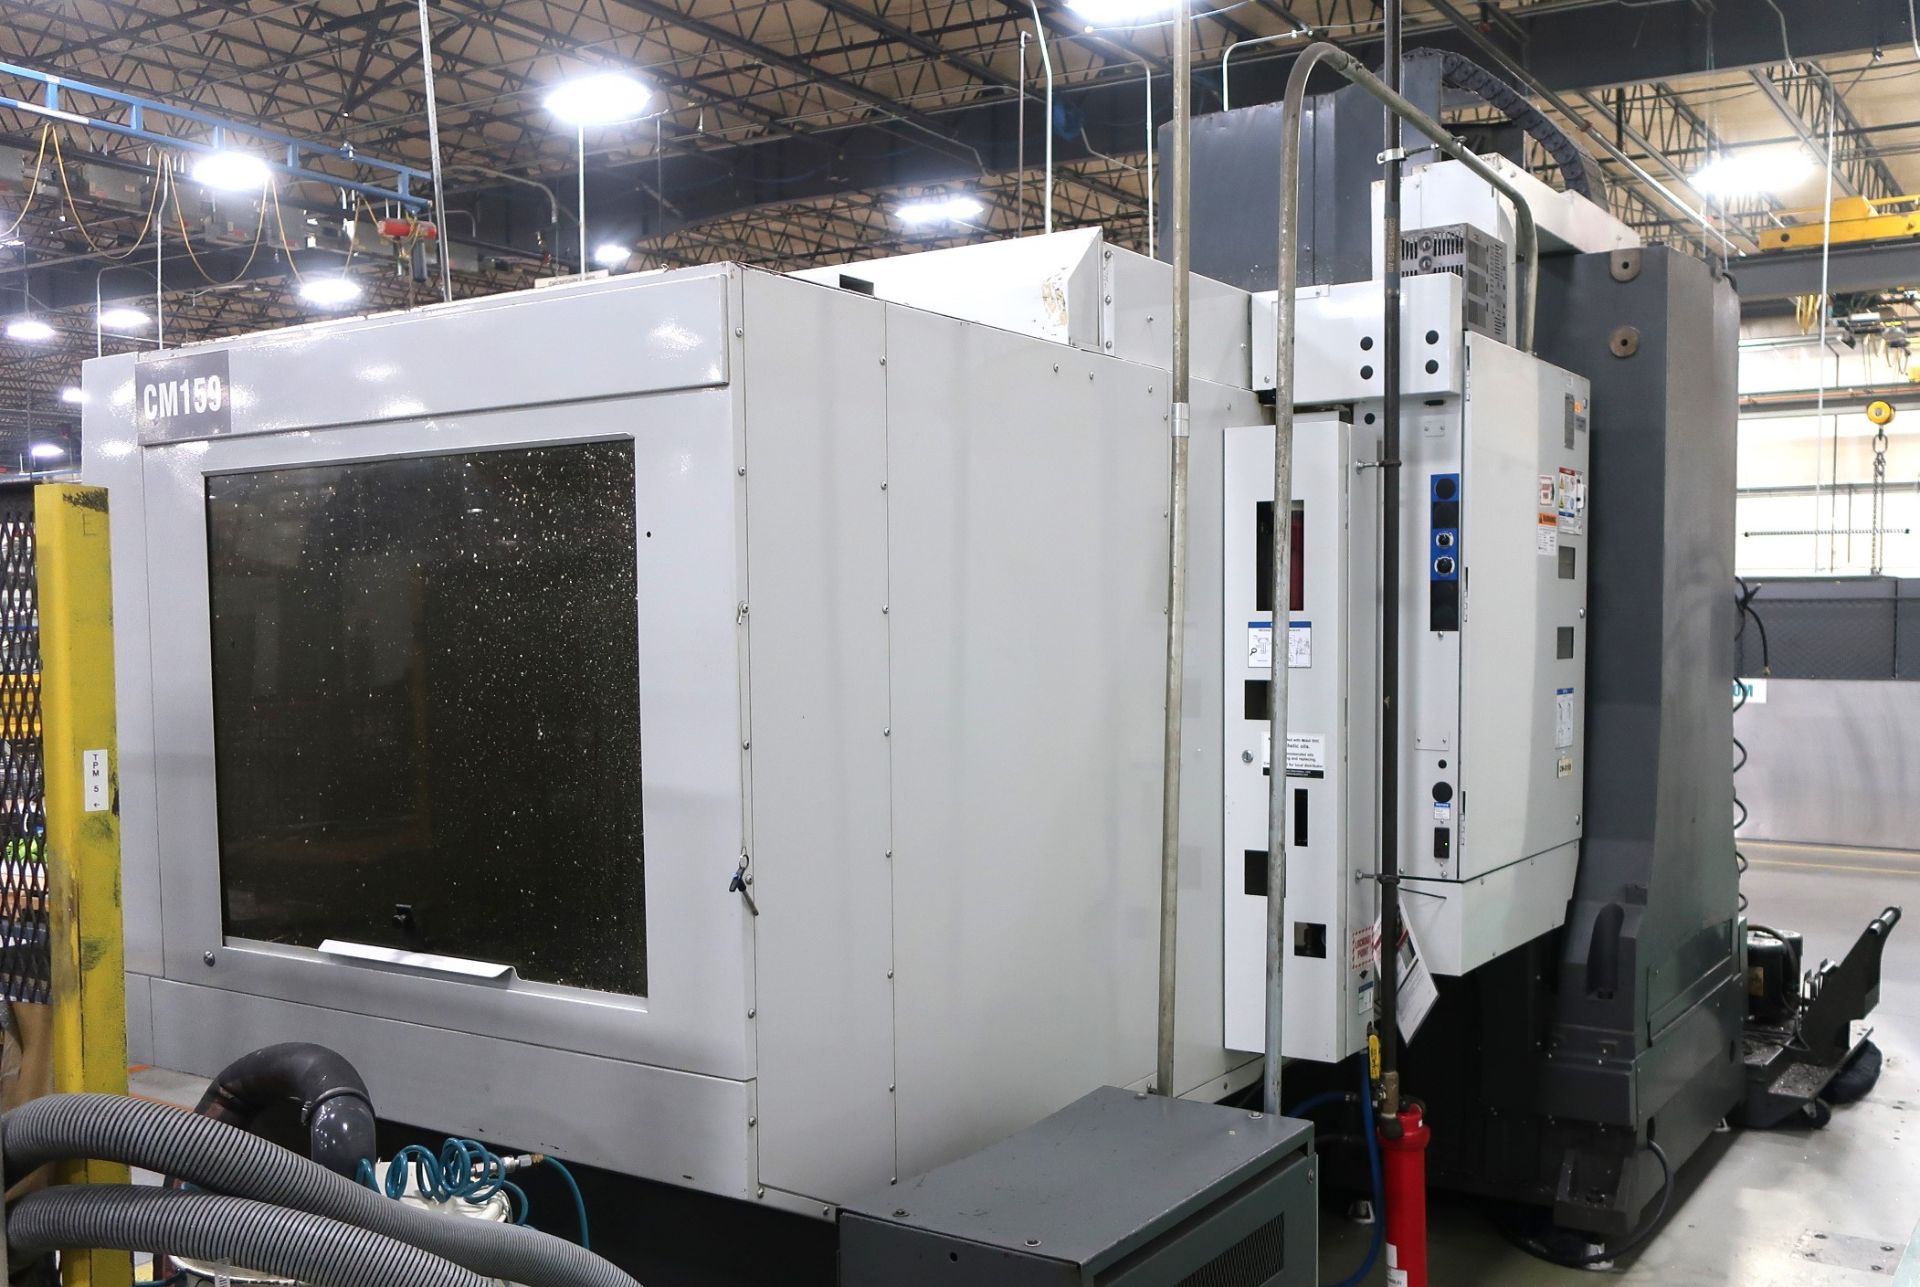 28" x 120" HAAS VF10/40 CNC VERTICAL MACHINING CENTER, NEW 2013 - Image 15 of 21